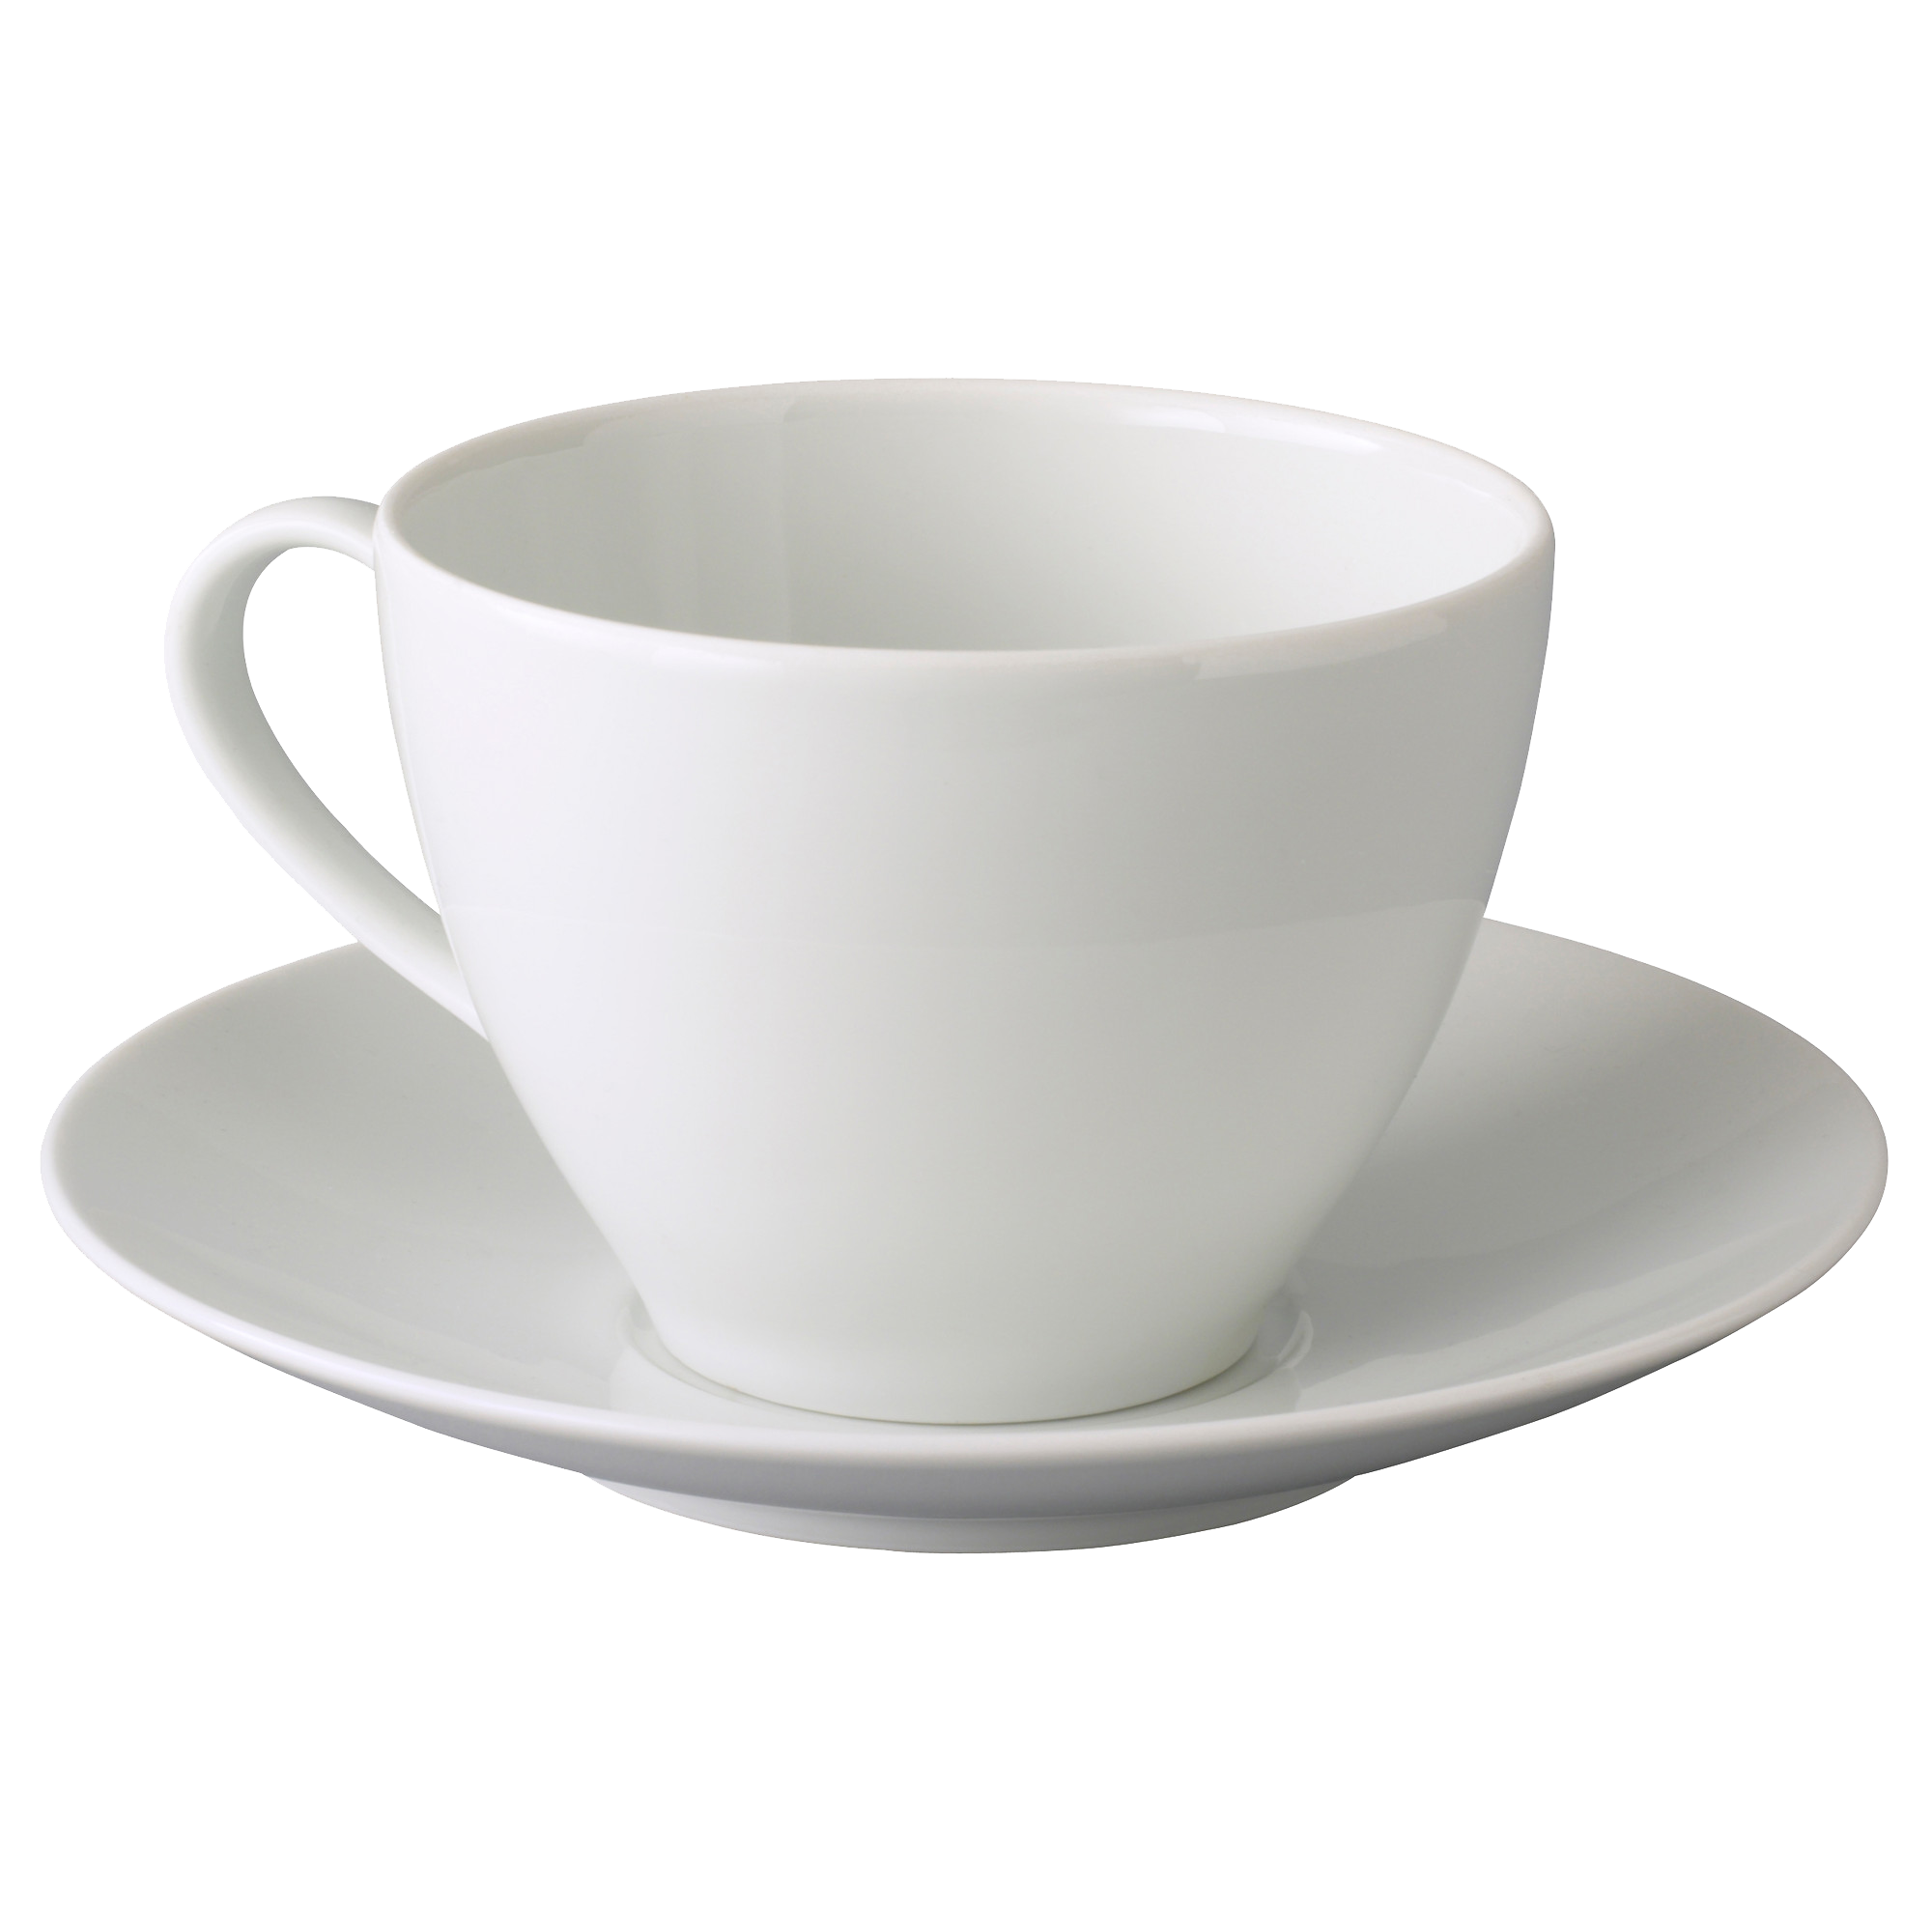 Tea Cup Png File - Cup Of Tea, Transparent background PNG HD thumbnail